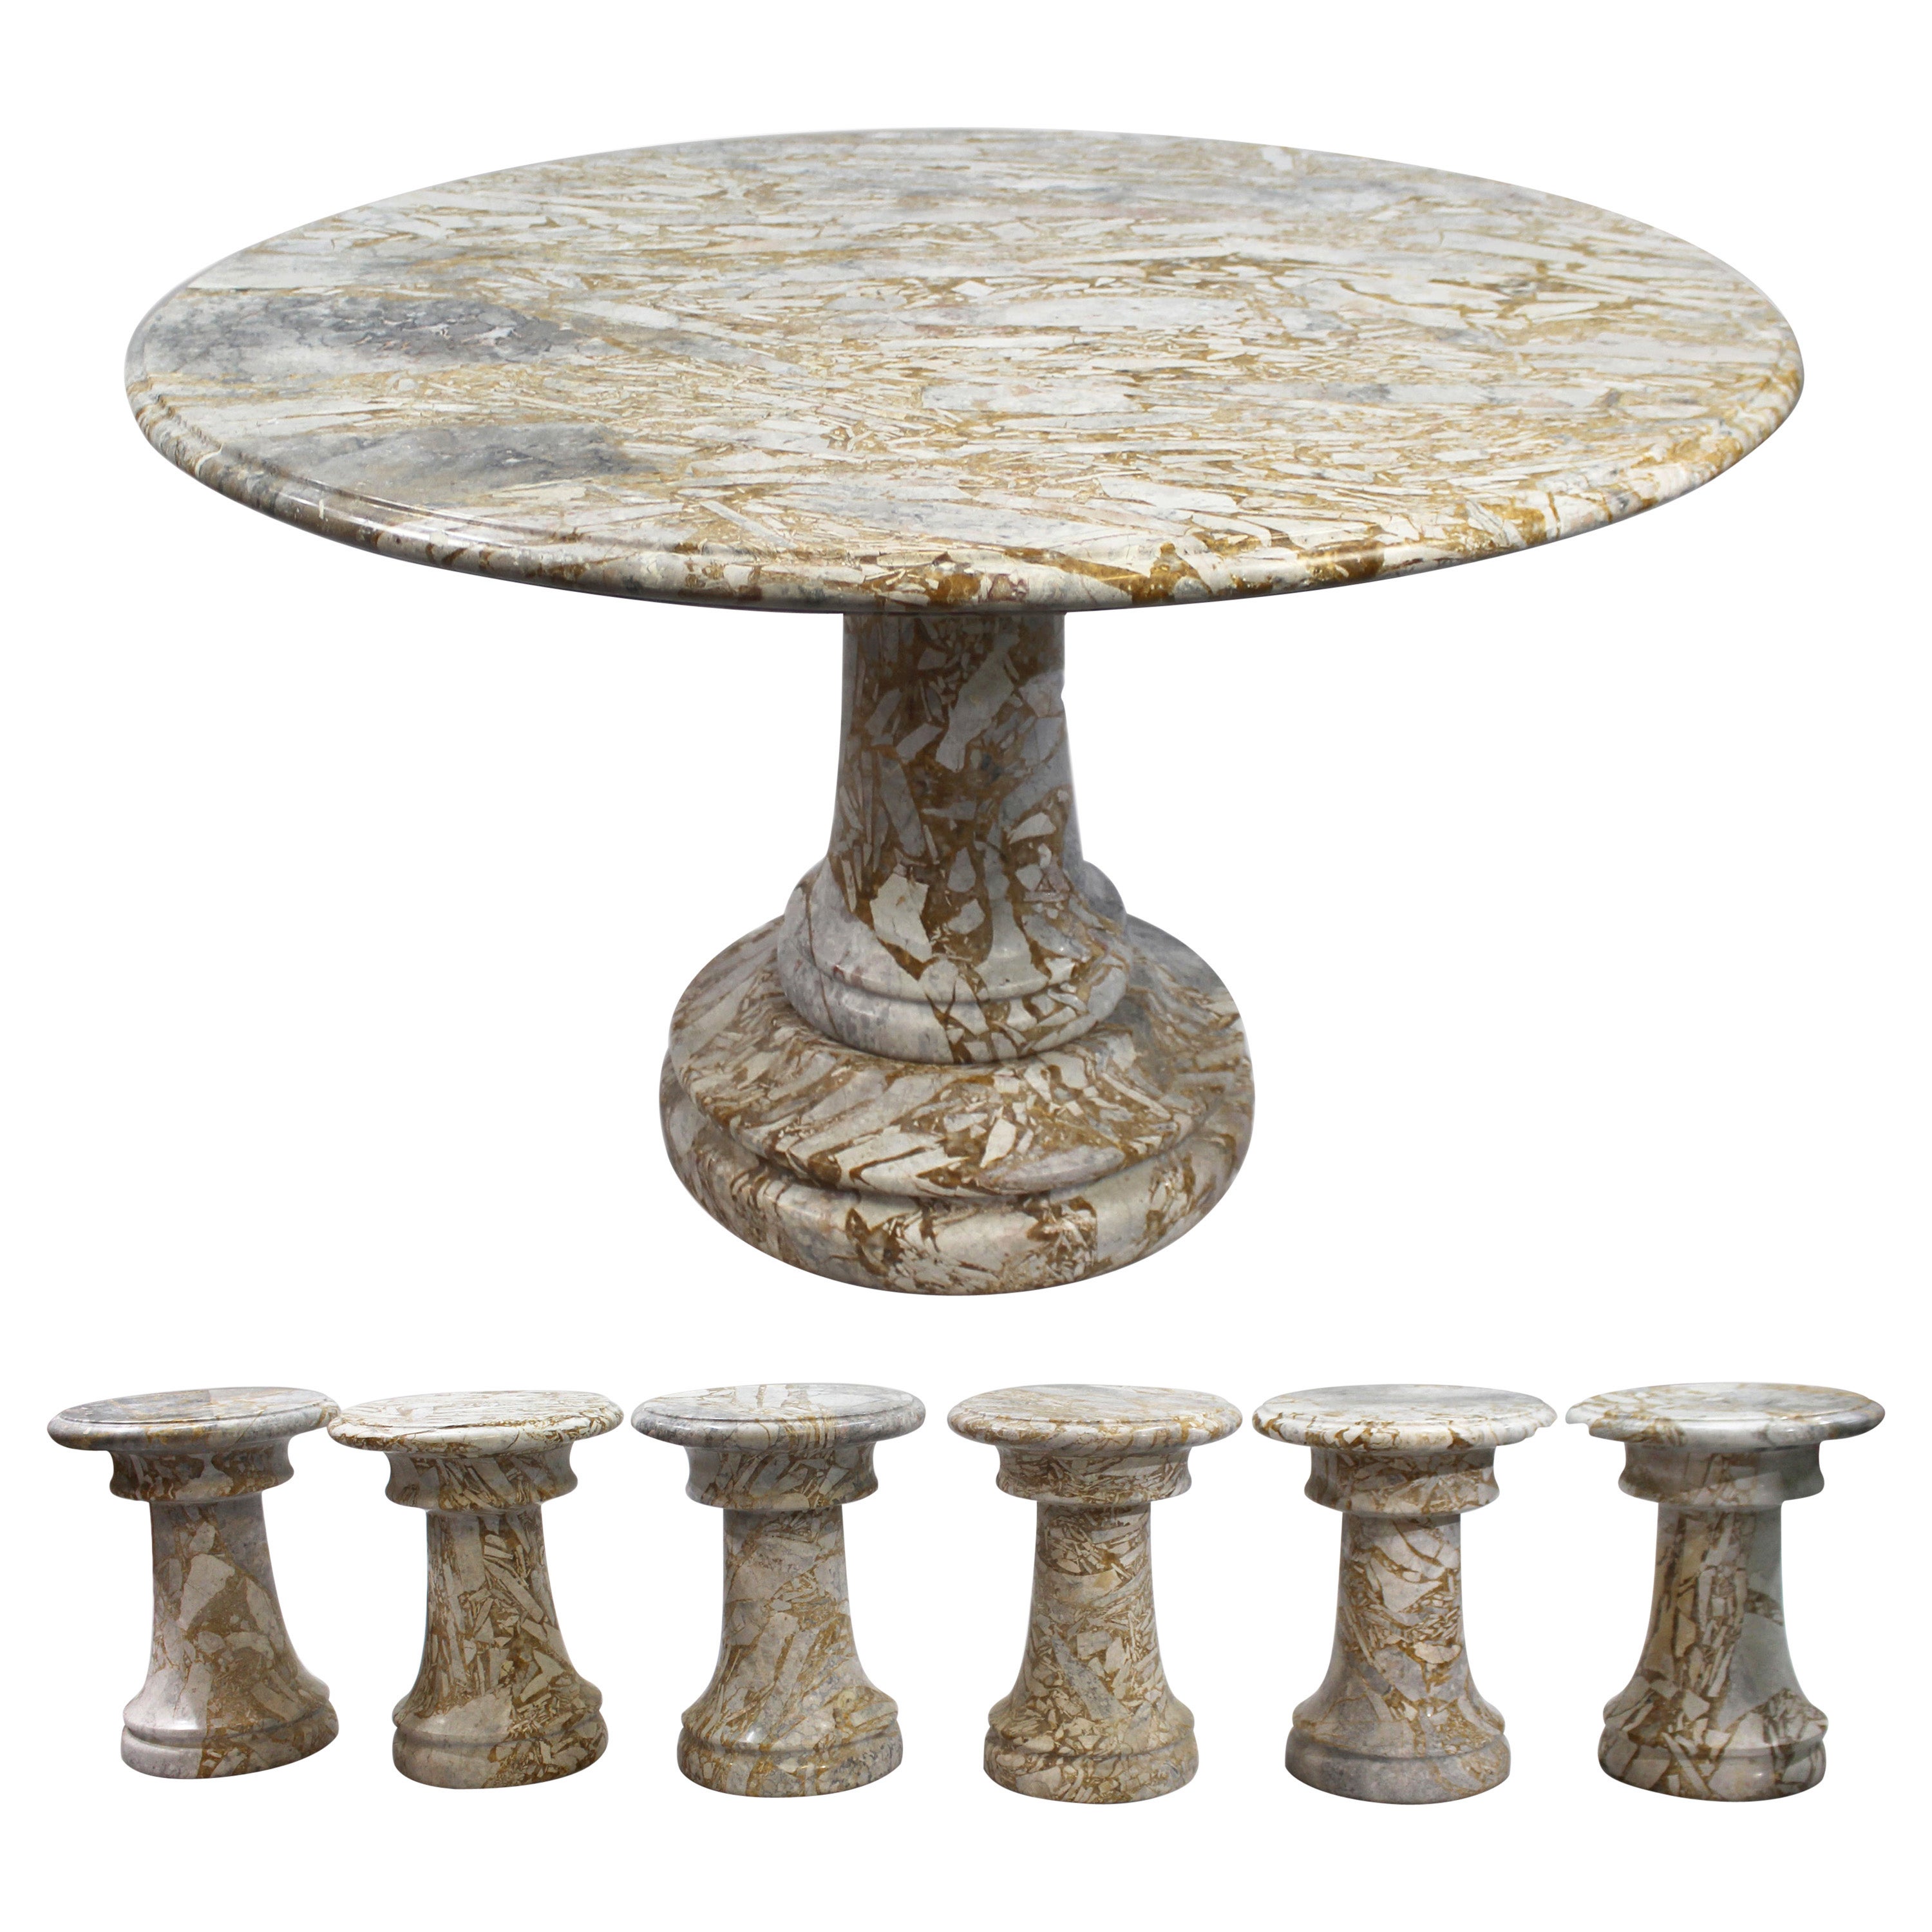 Fine Middle Eastern Circular Marble Table & 6 Stools